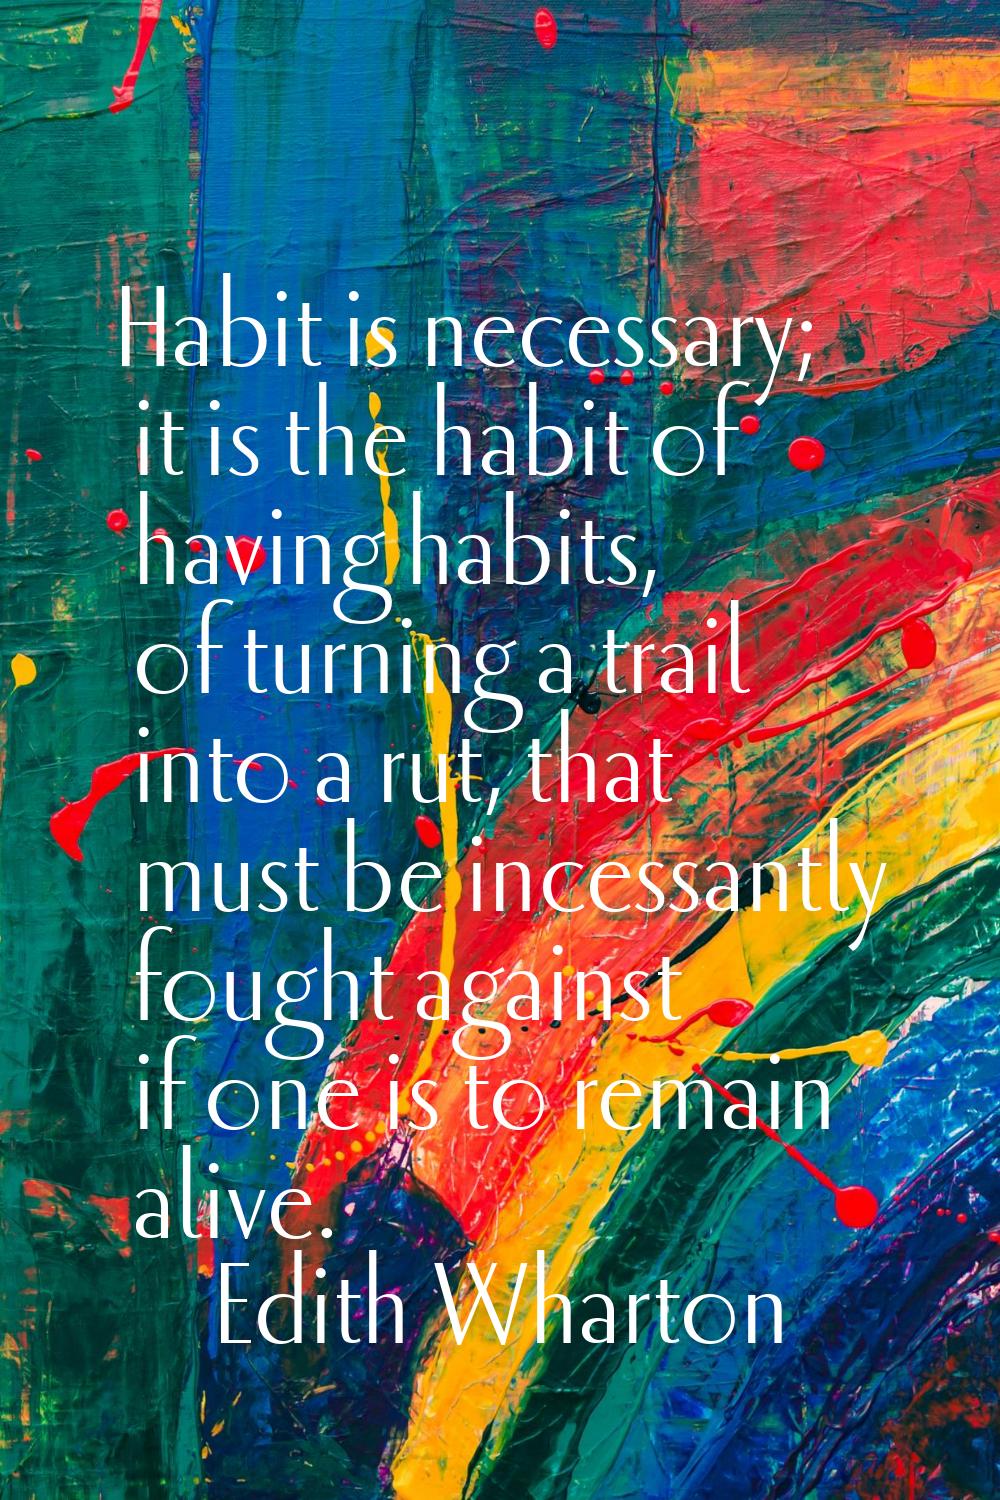 Habit is necessary; it is the habit of having habits, of turning a trail into a rut, that must be i